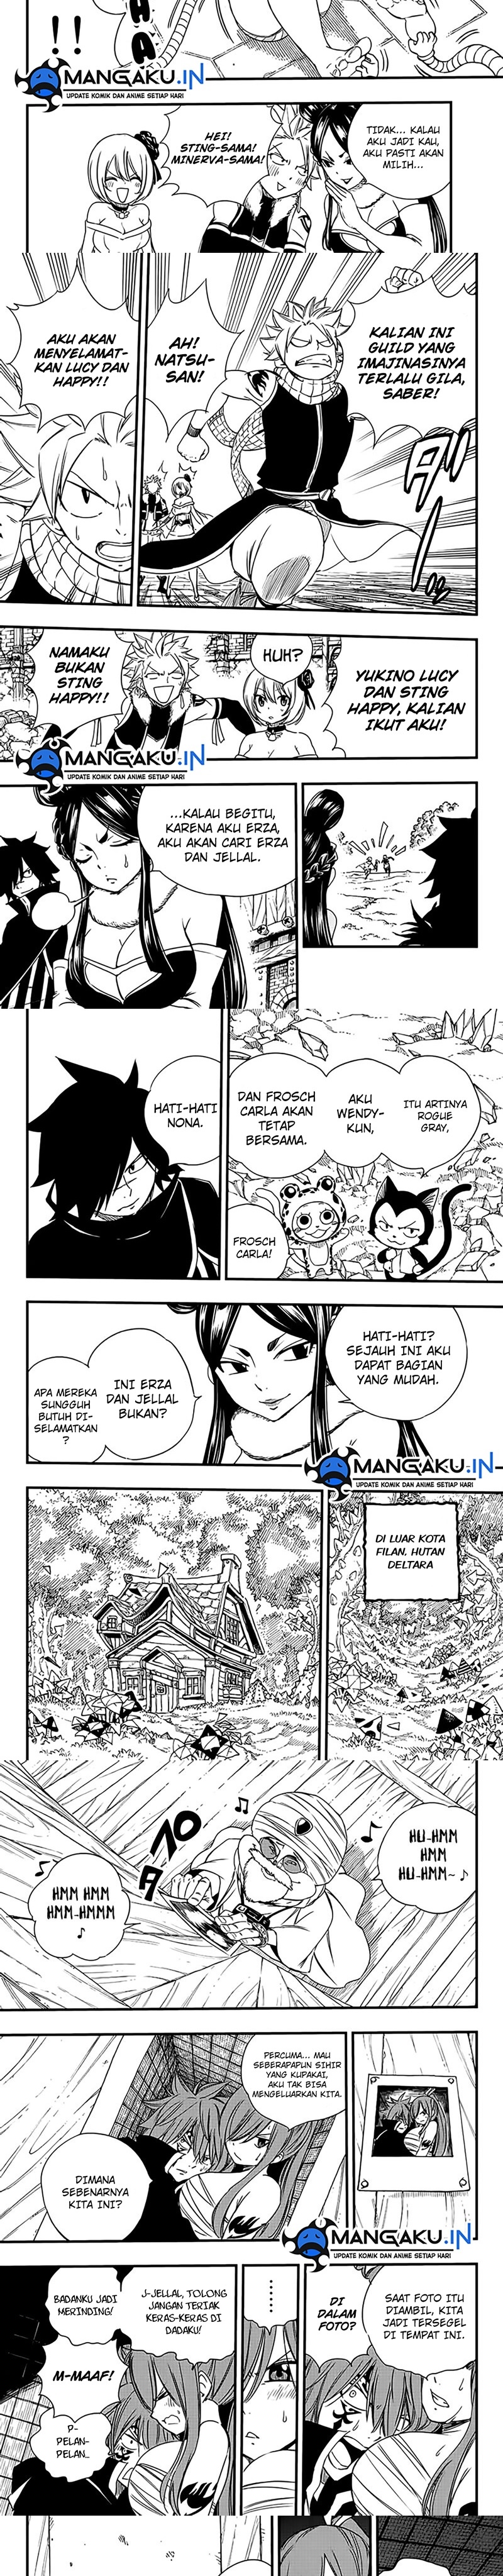 Fairy Tail 100 Years Quest Chapter 128